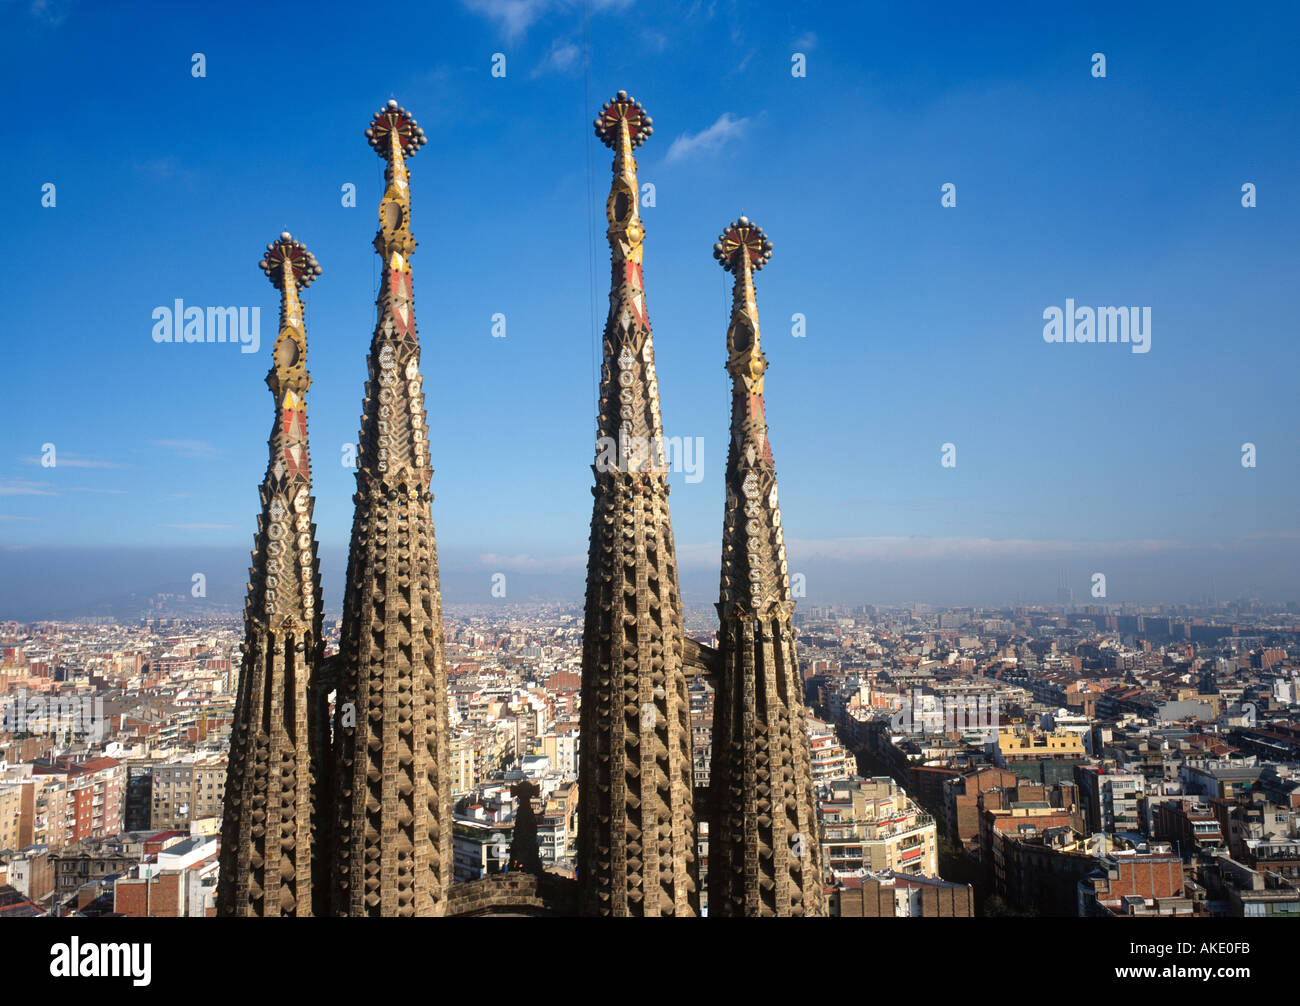 Spain Barcelona Gaudi s Unfinished Cathederal View from the building SB Stock Photo